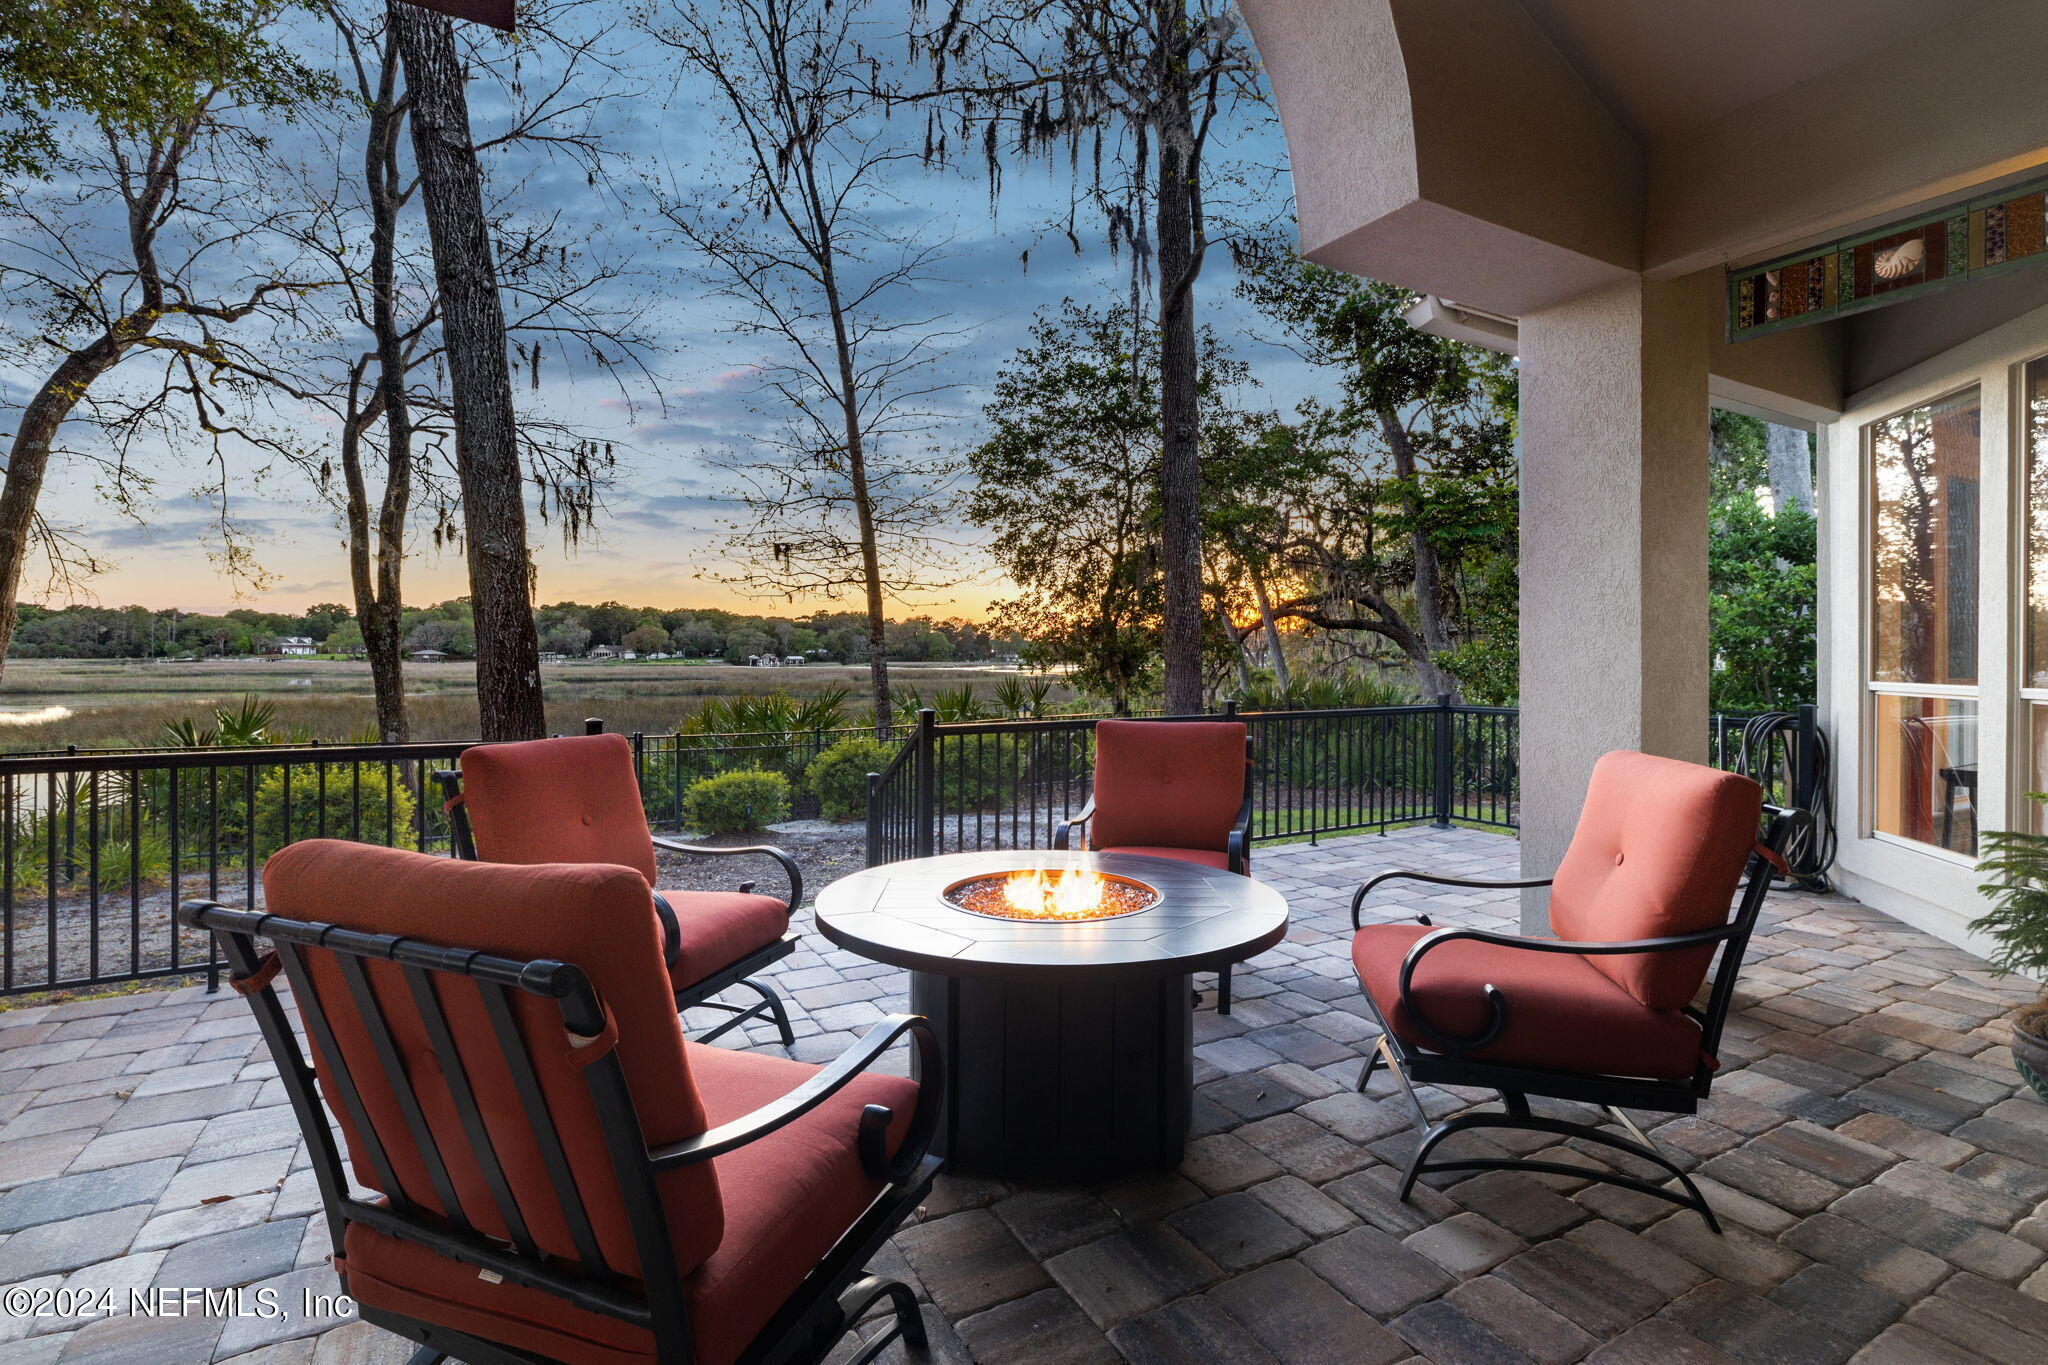 a view of a patio with furniture and a grill